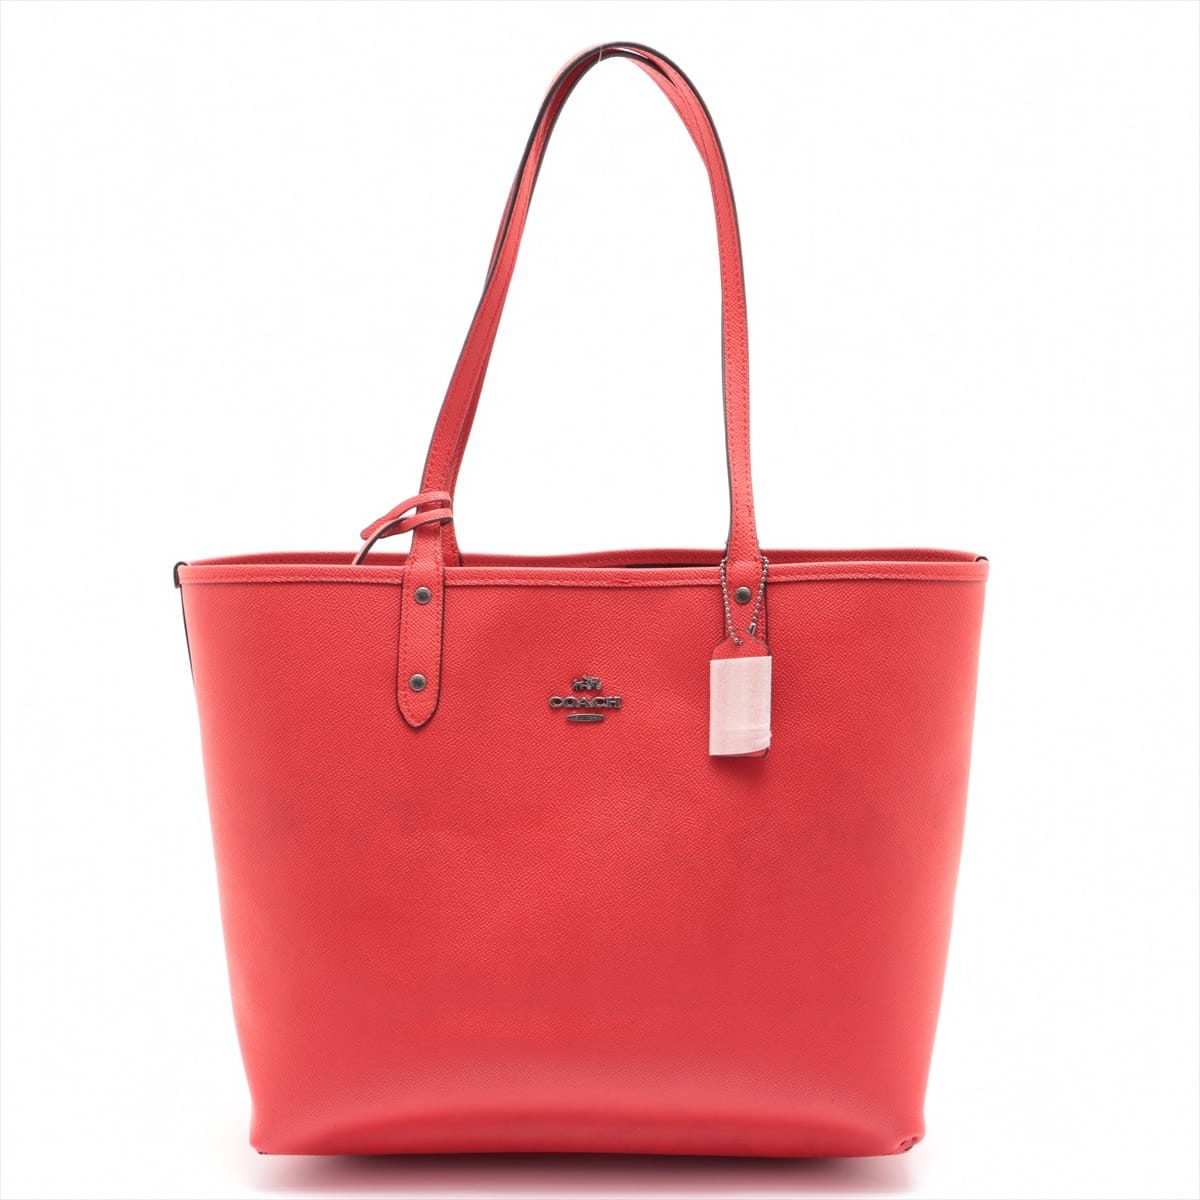 COACH Reversible PVC Tote bag Red F25874 with pouch